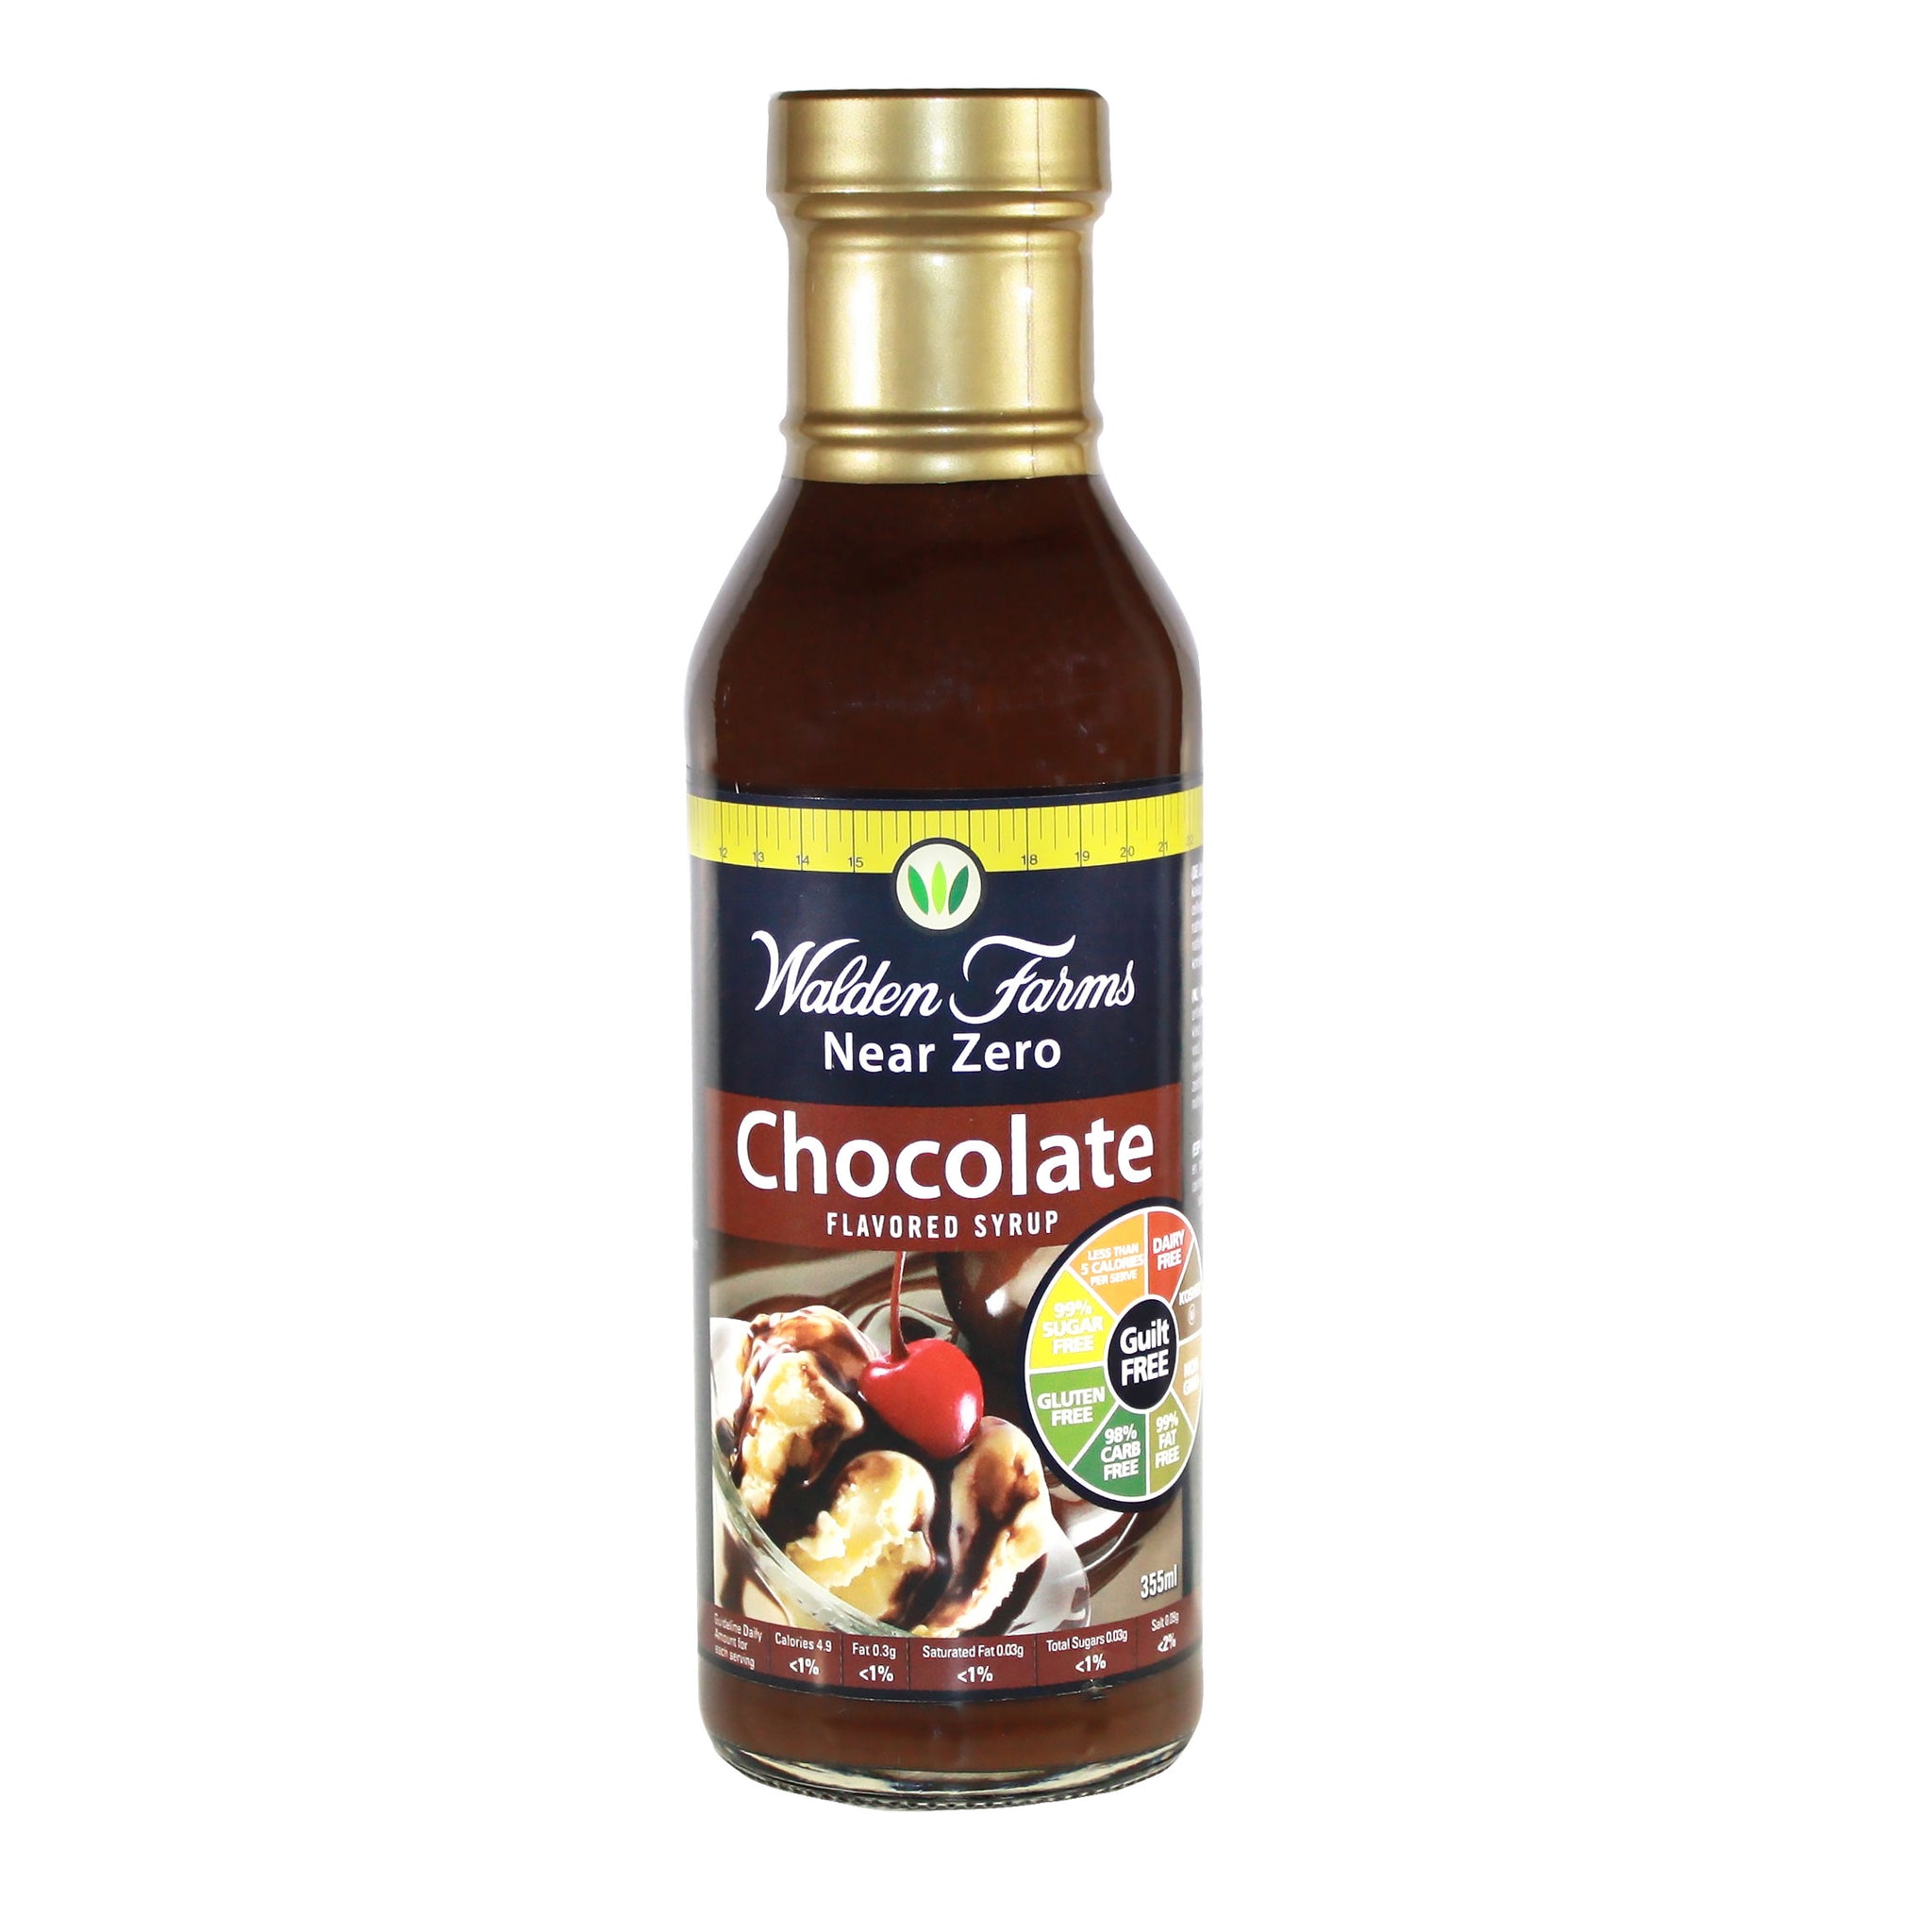 Gluten Free Chocolate Syrup with Near Zero Calories & Fats